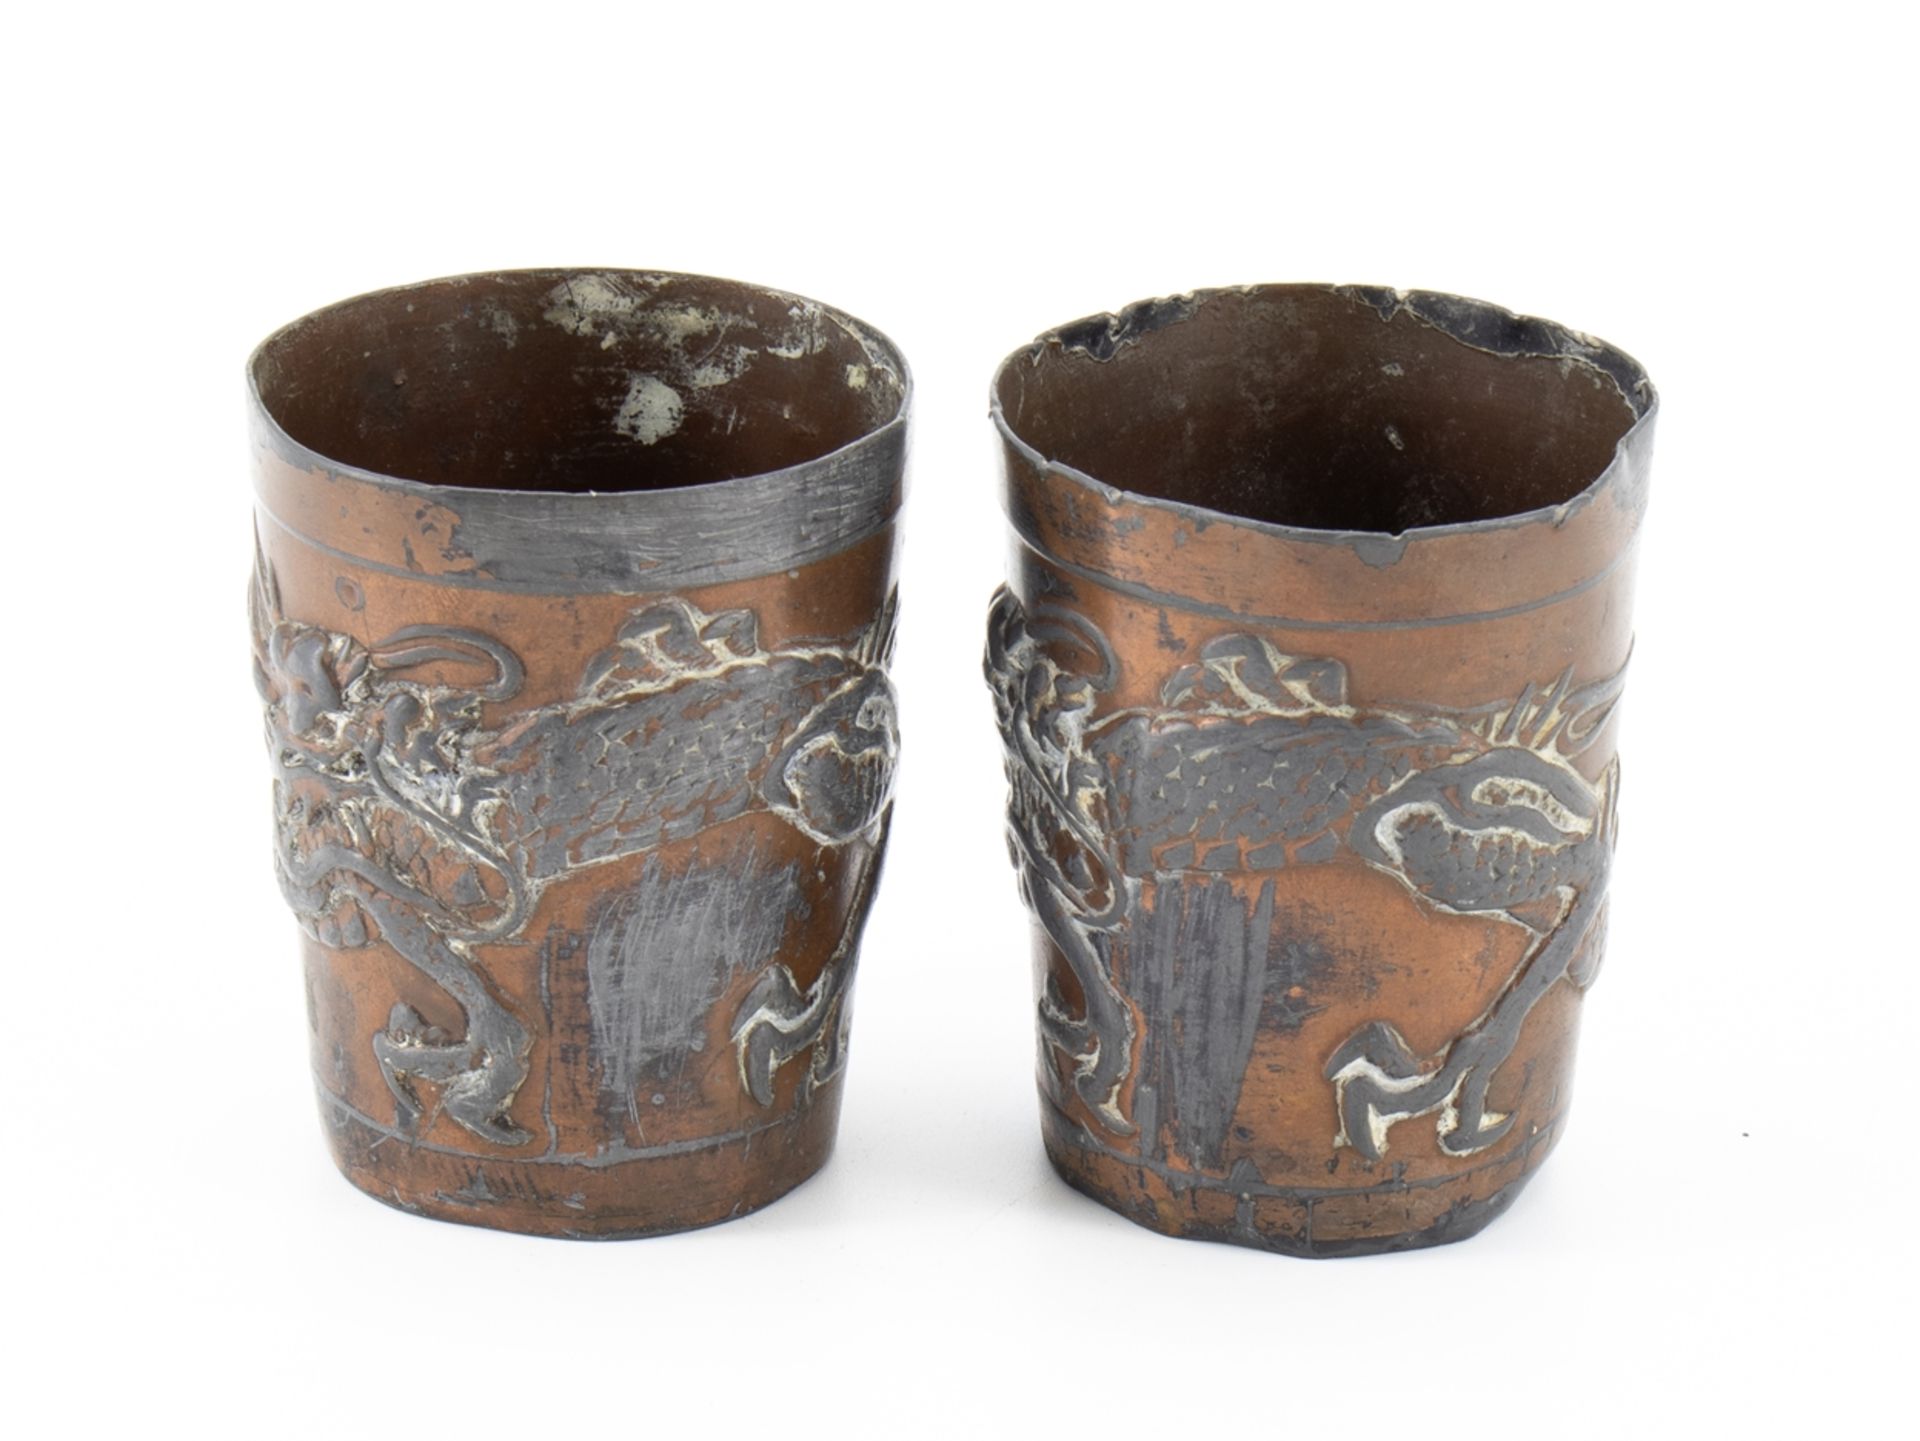 4 cups with dragon motif, China, around 1900 - Image 5 of 12